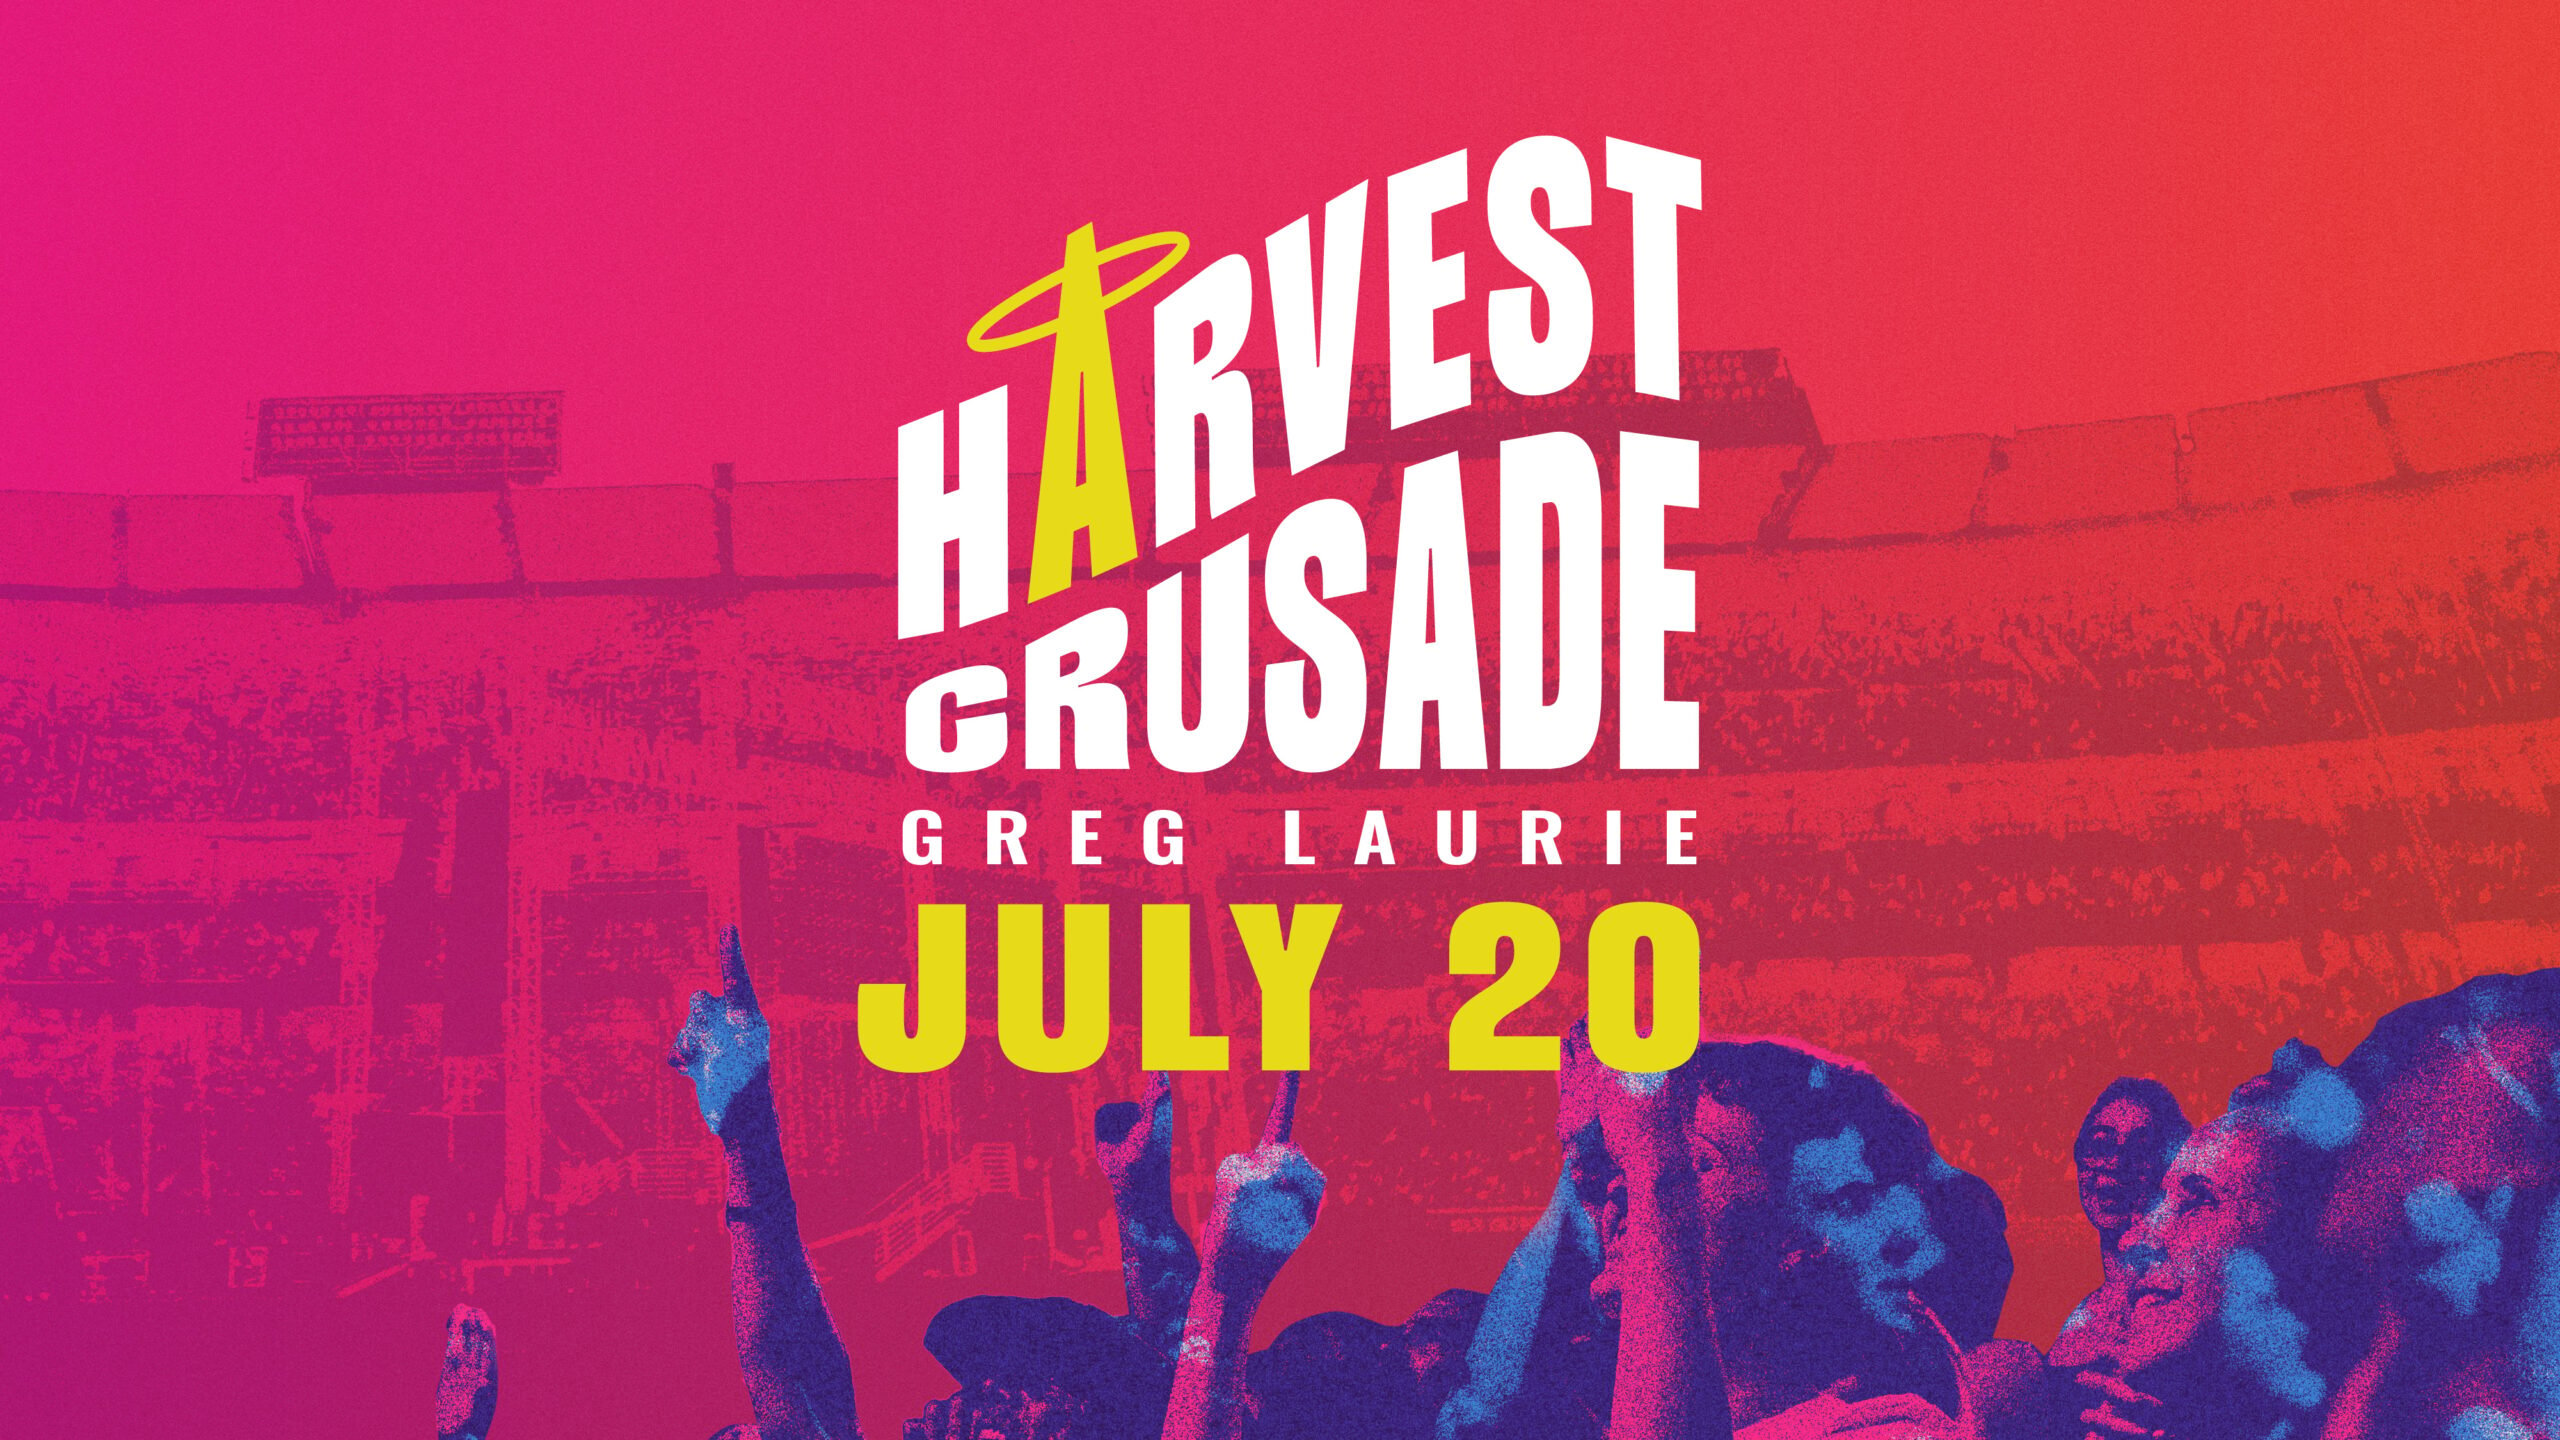 Harvest Crusade with Greg Laurie on July 20 at Angel Stadium